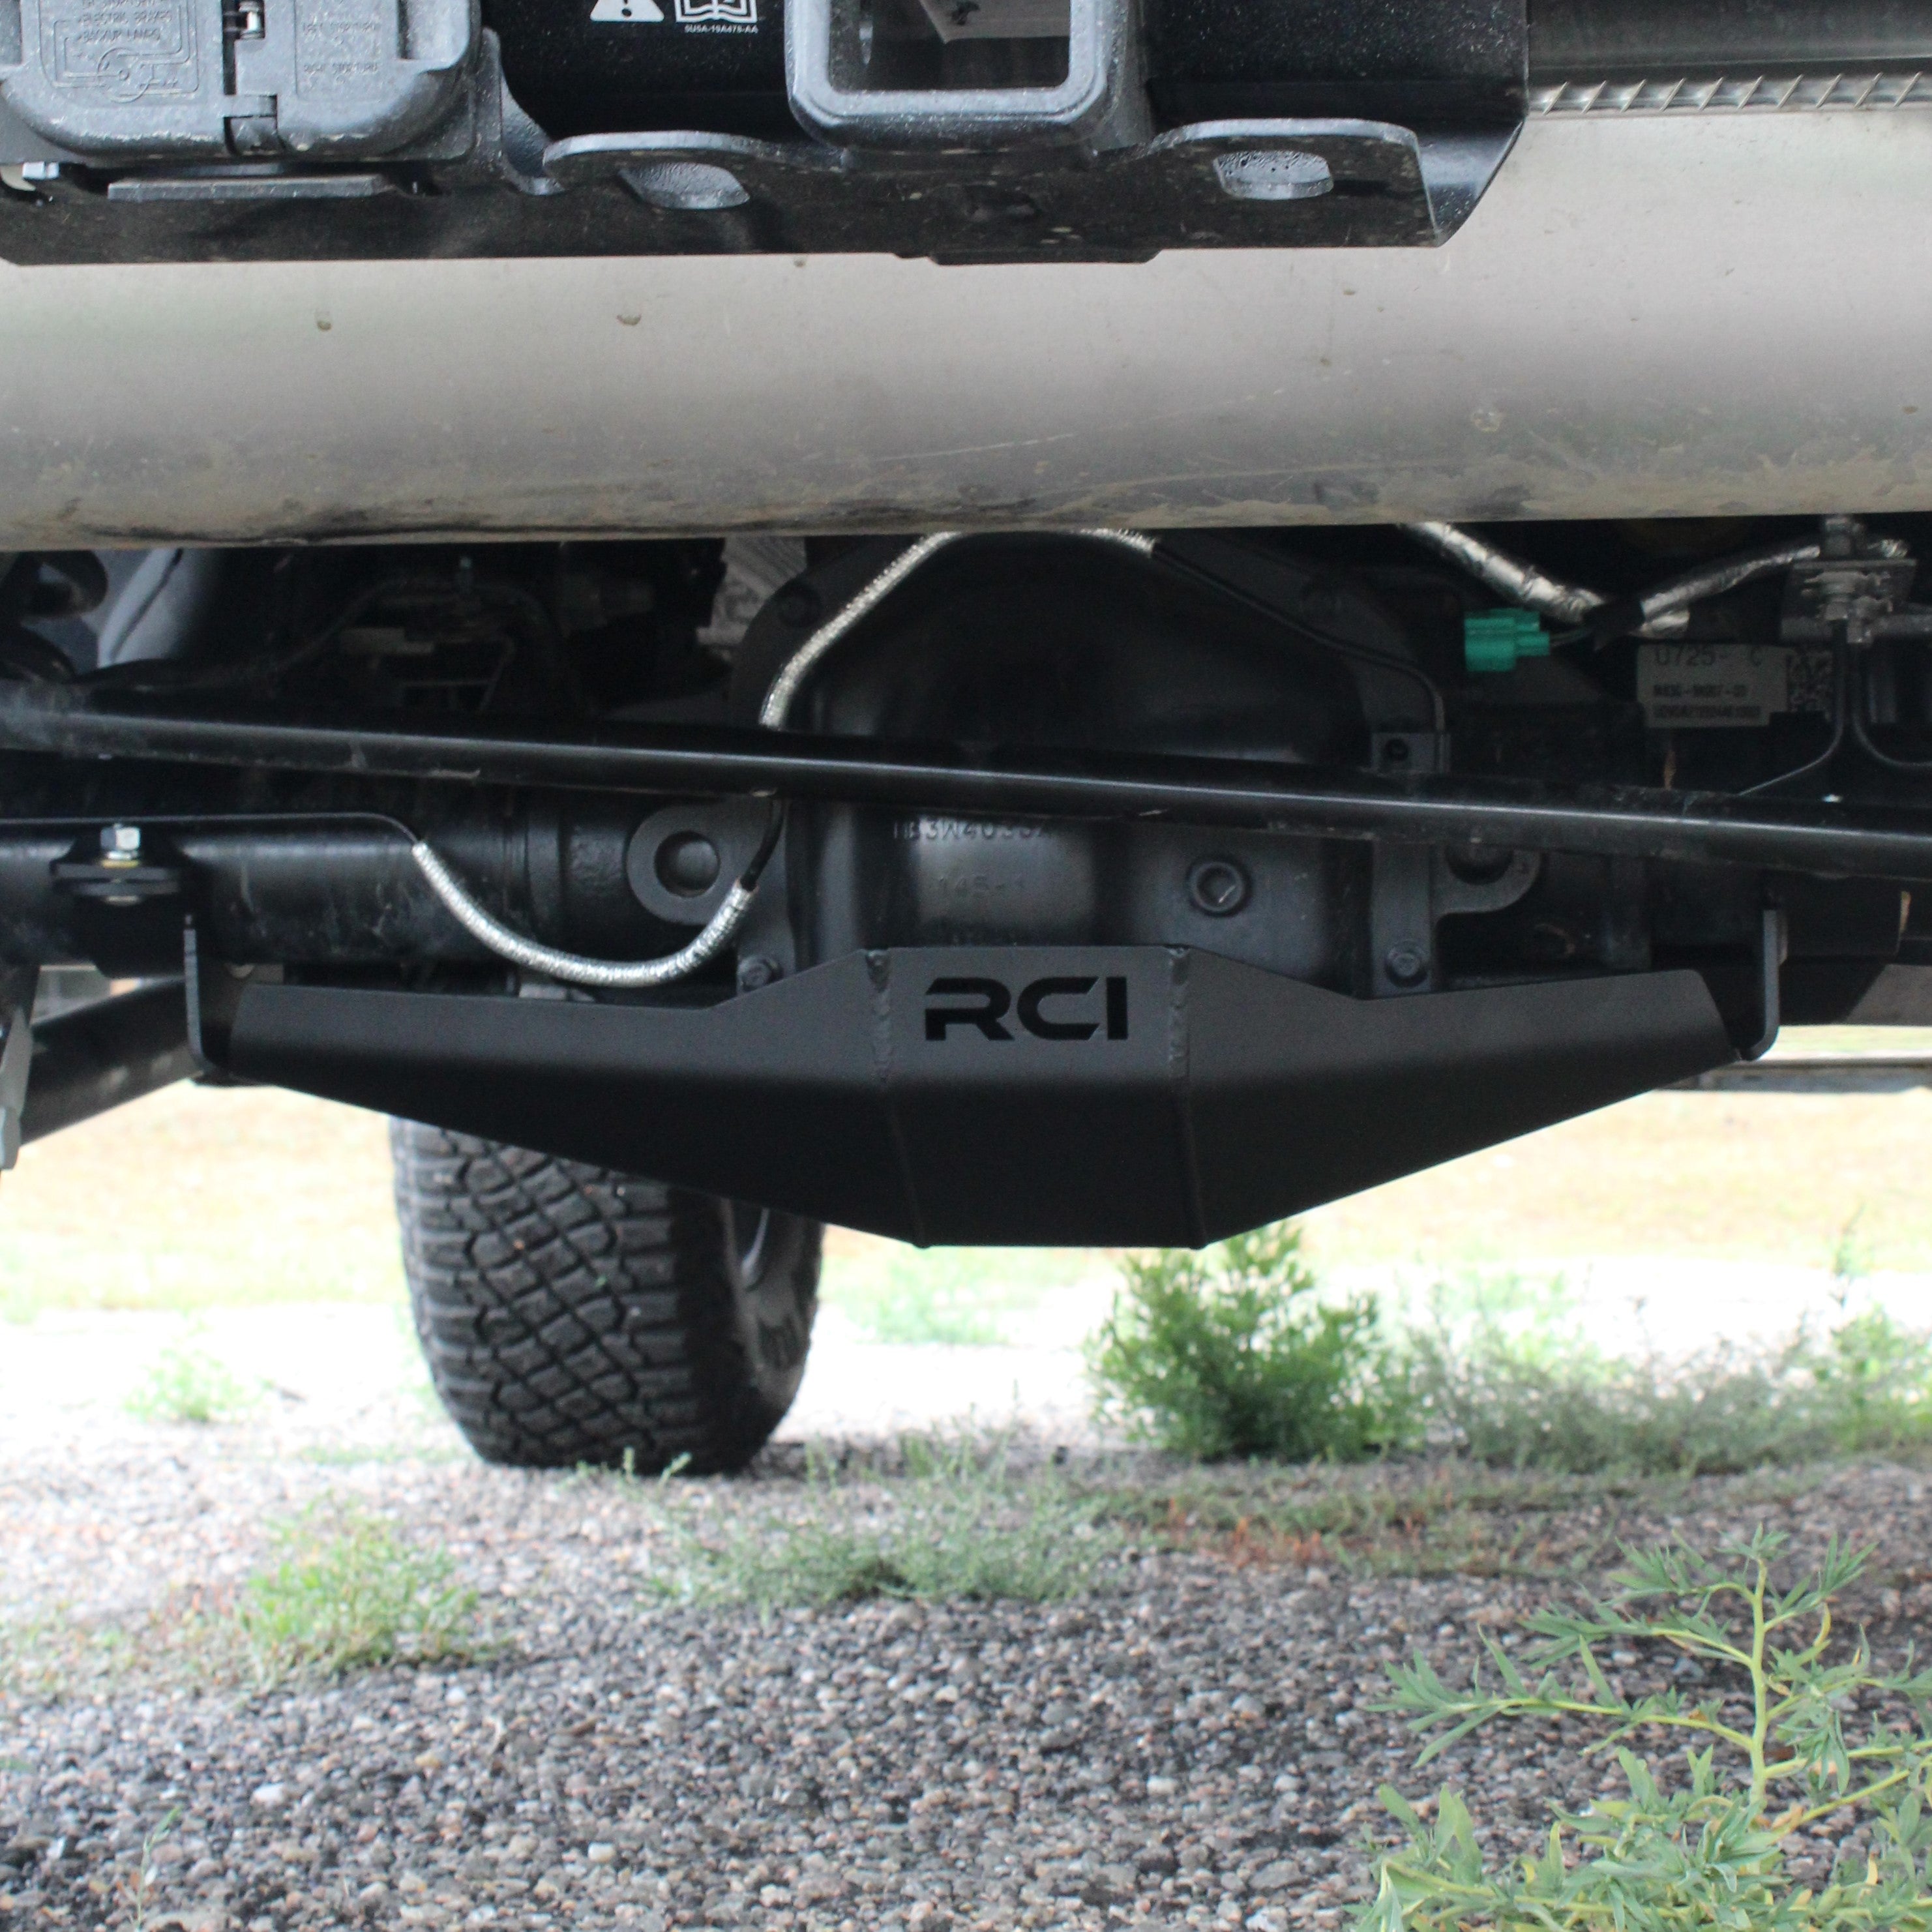 '21-Current Ford Bronco RCI Rear Differential Skid Plate